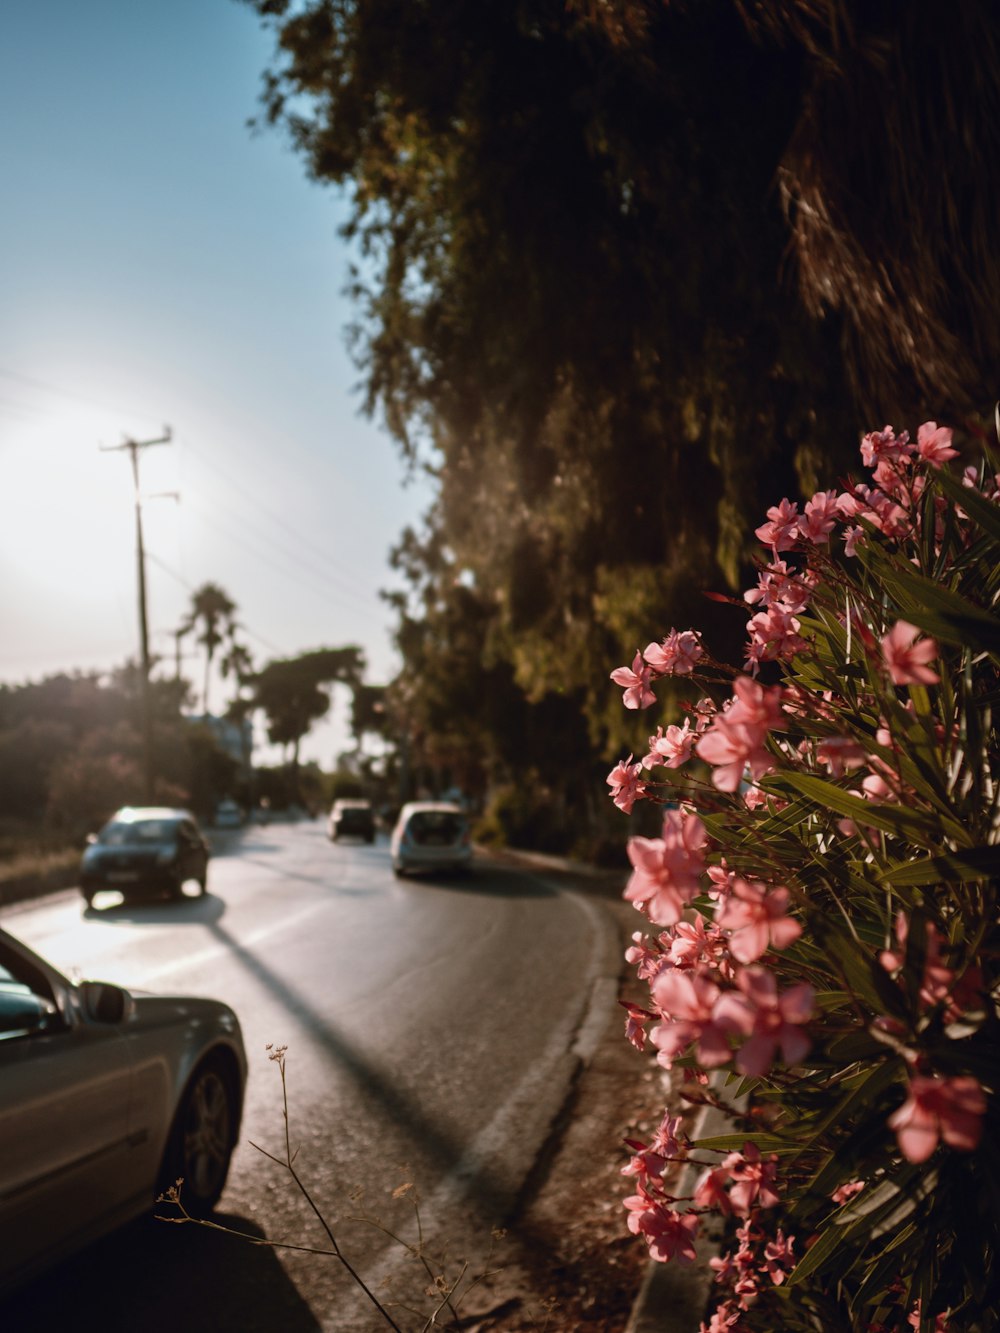 a street with cars and flowers on it